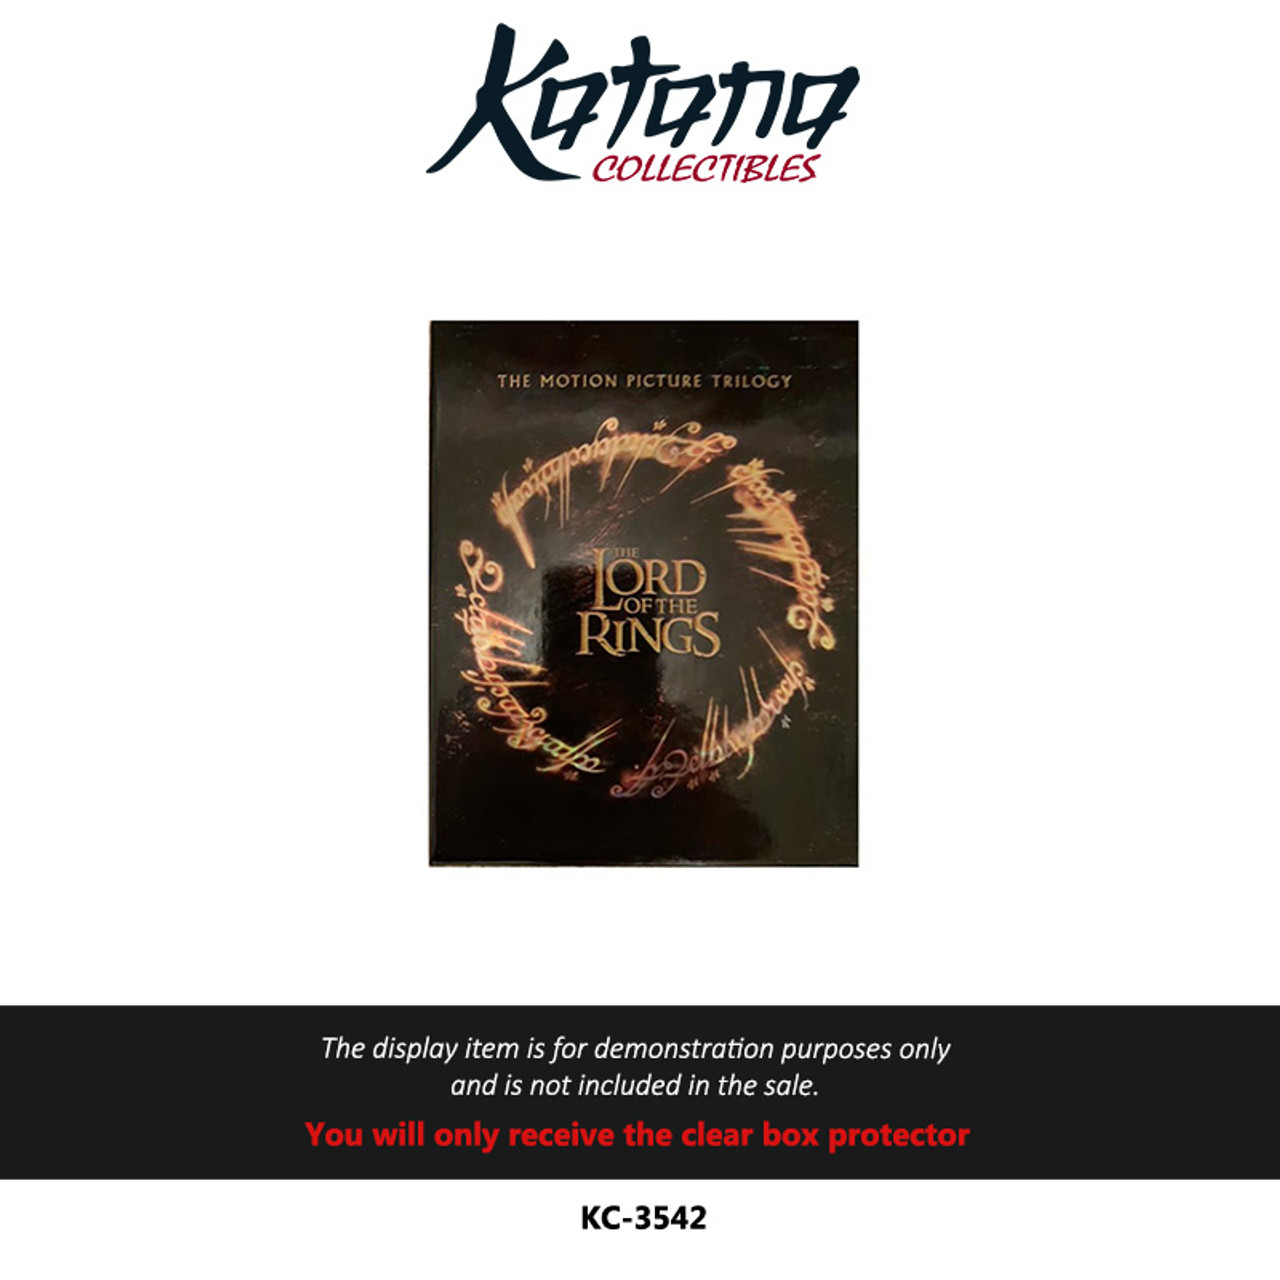 Katana Collectibles Protector For Lord of the Rings Trilogy Bluray Set